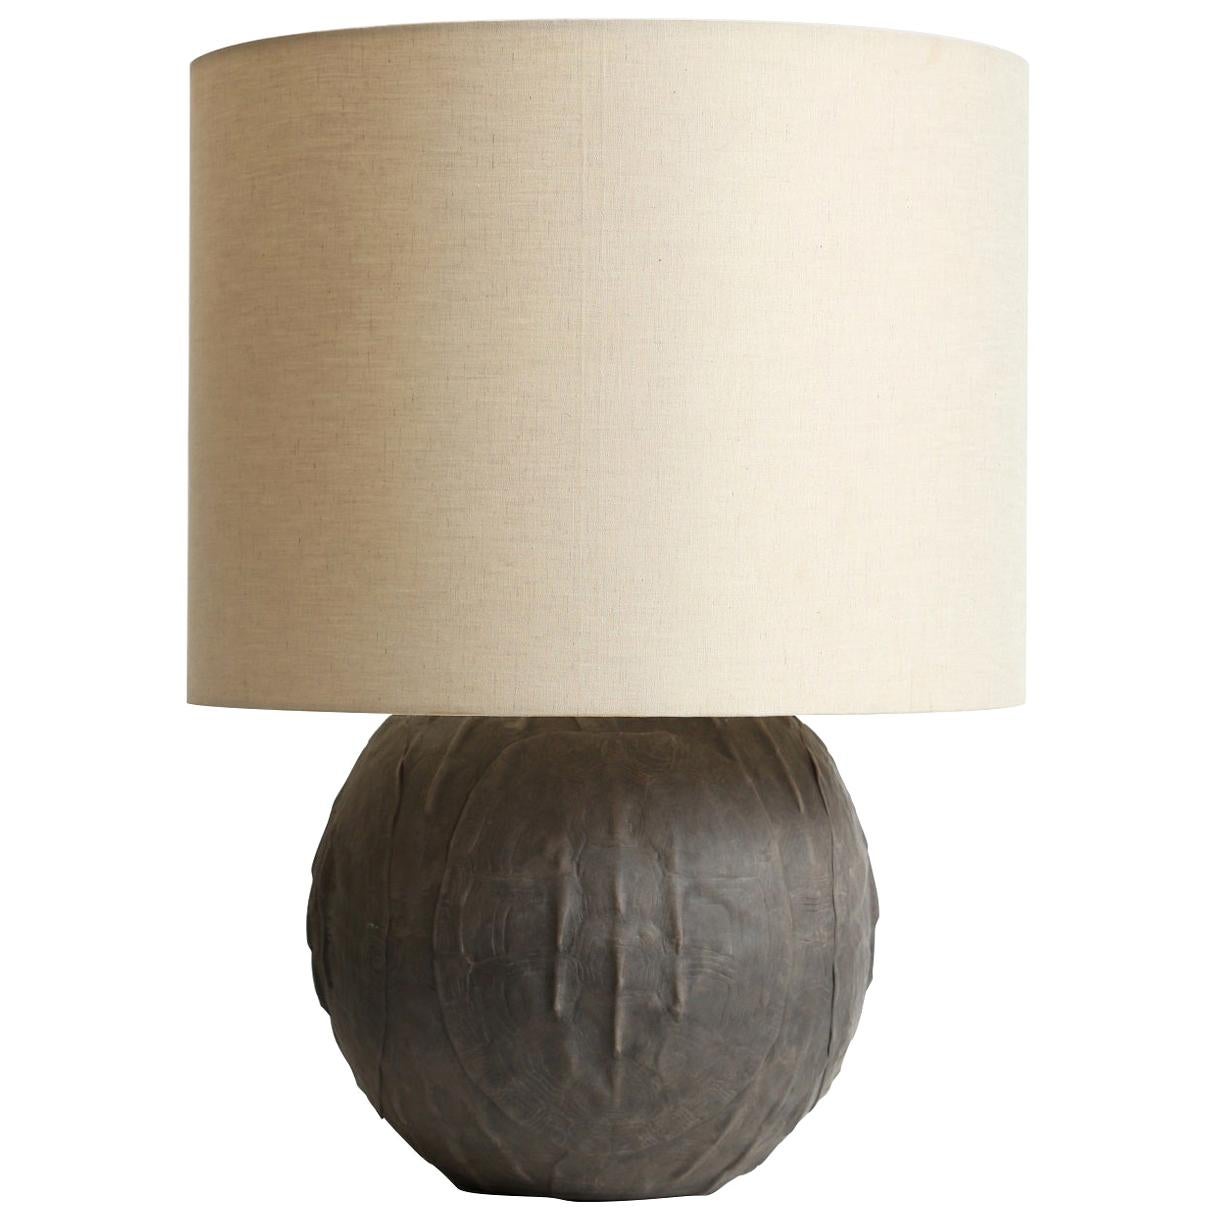 Giles Caffier Turtle Molded Ceramic Round Table Lamp, Made in Paris